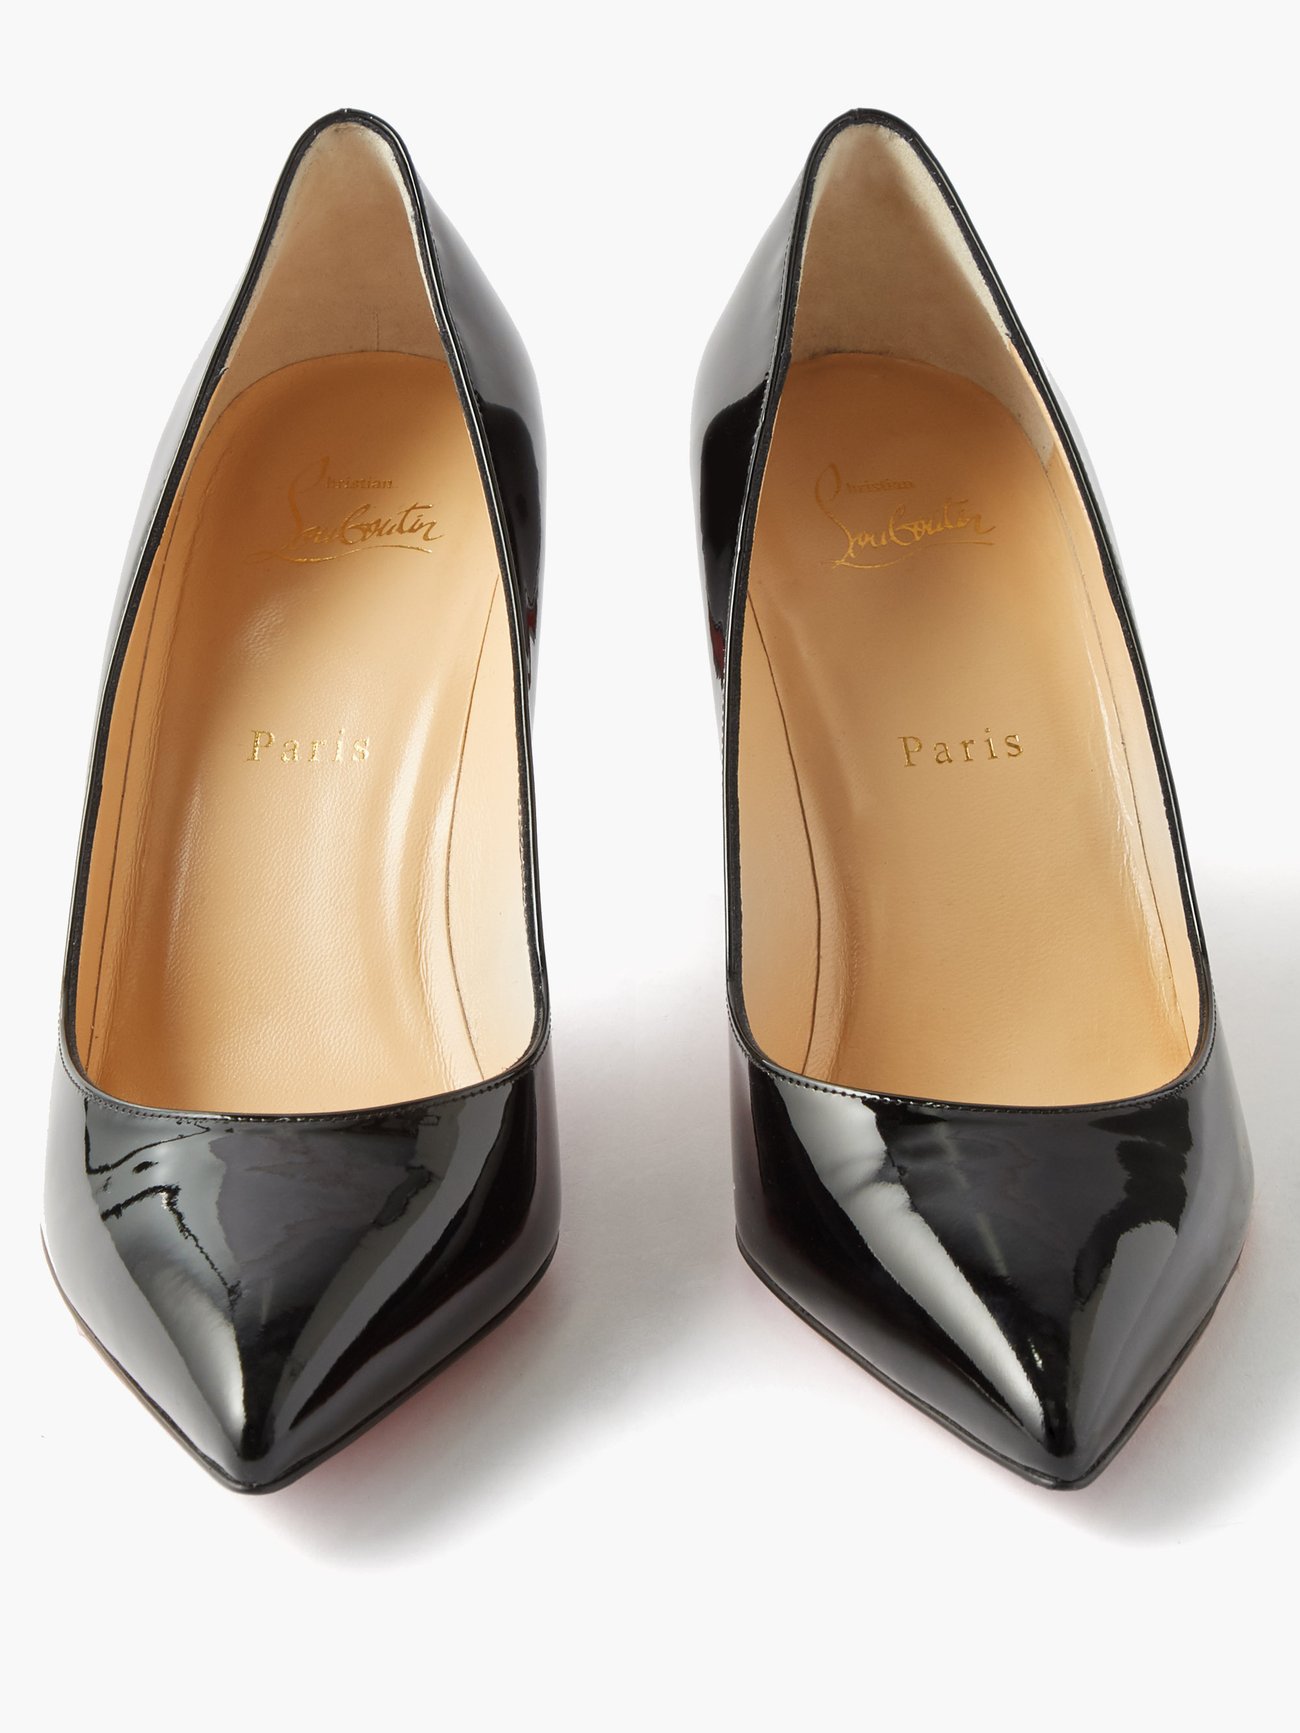 Pigalle 85 Patent Leather Pumps in Black - Christian Louboutin